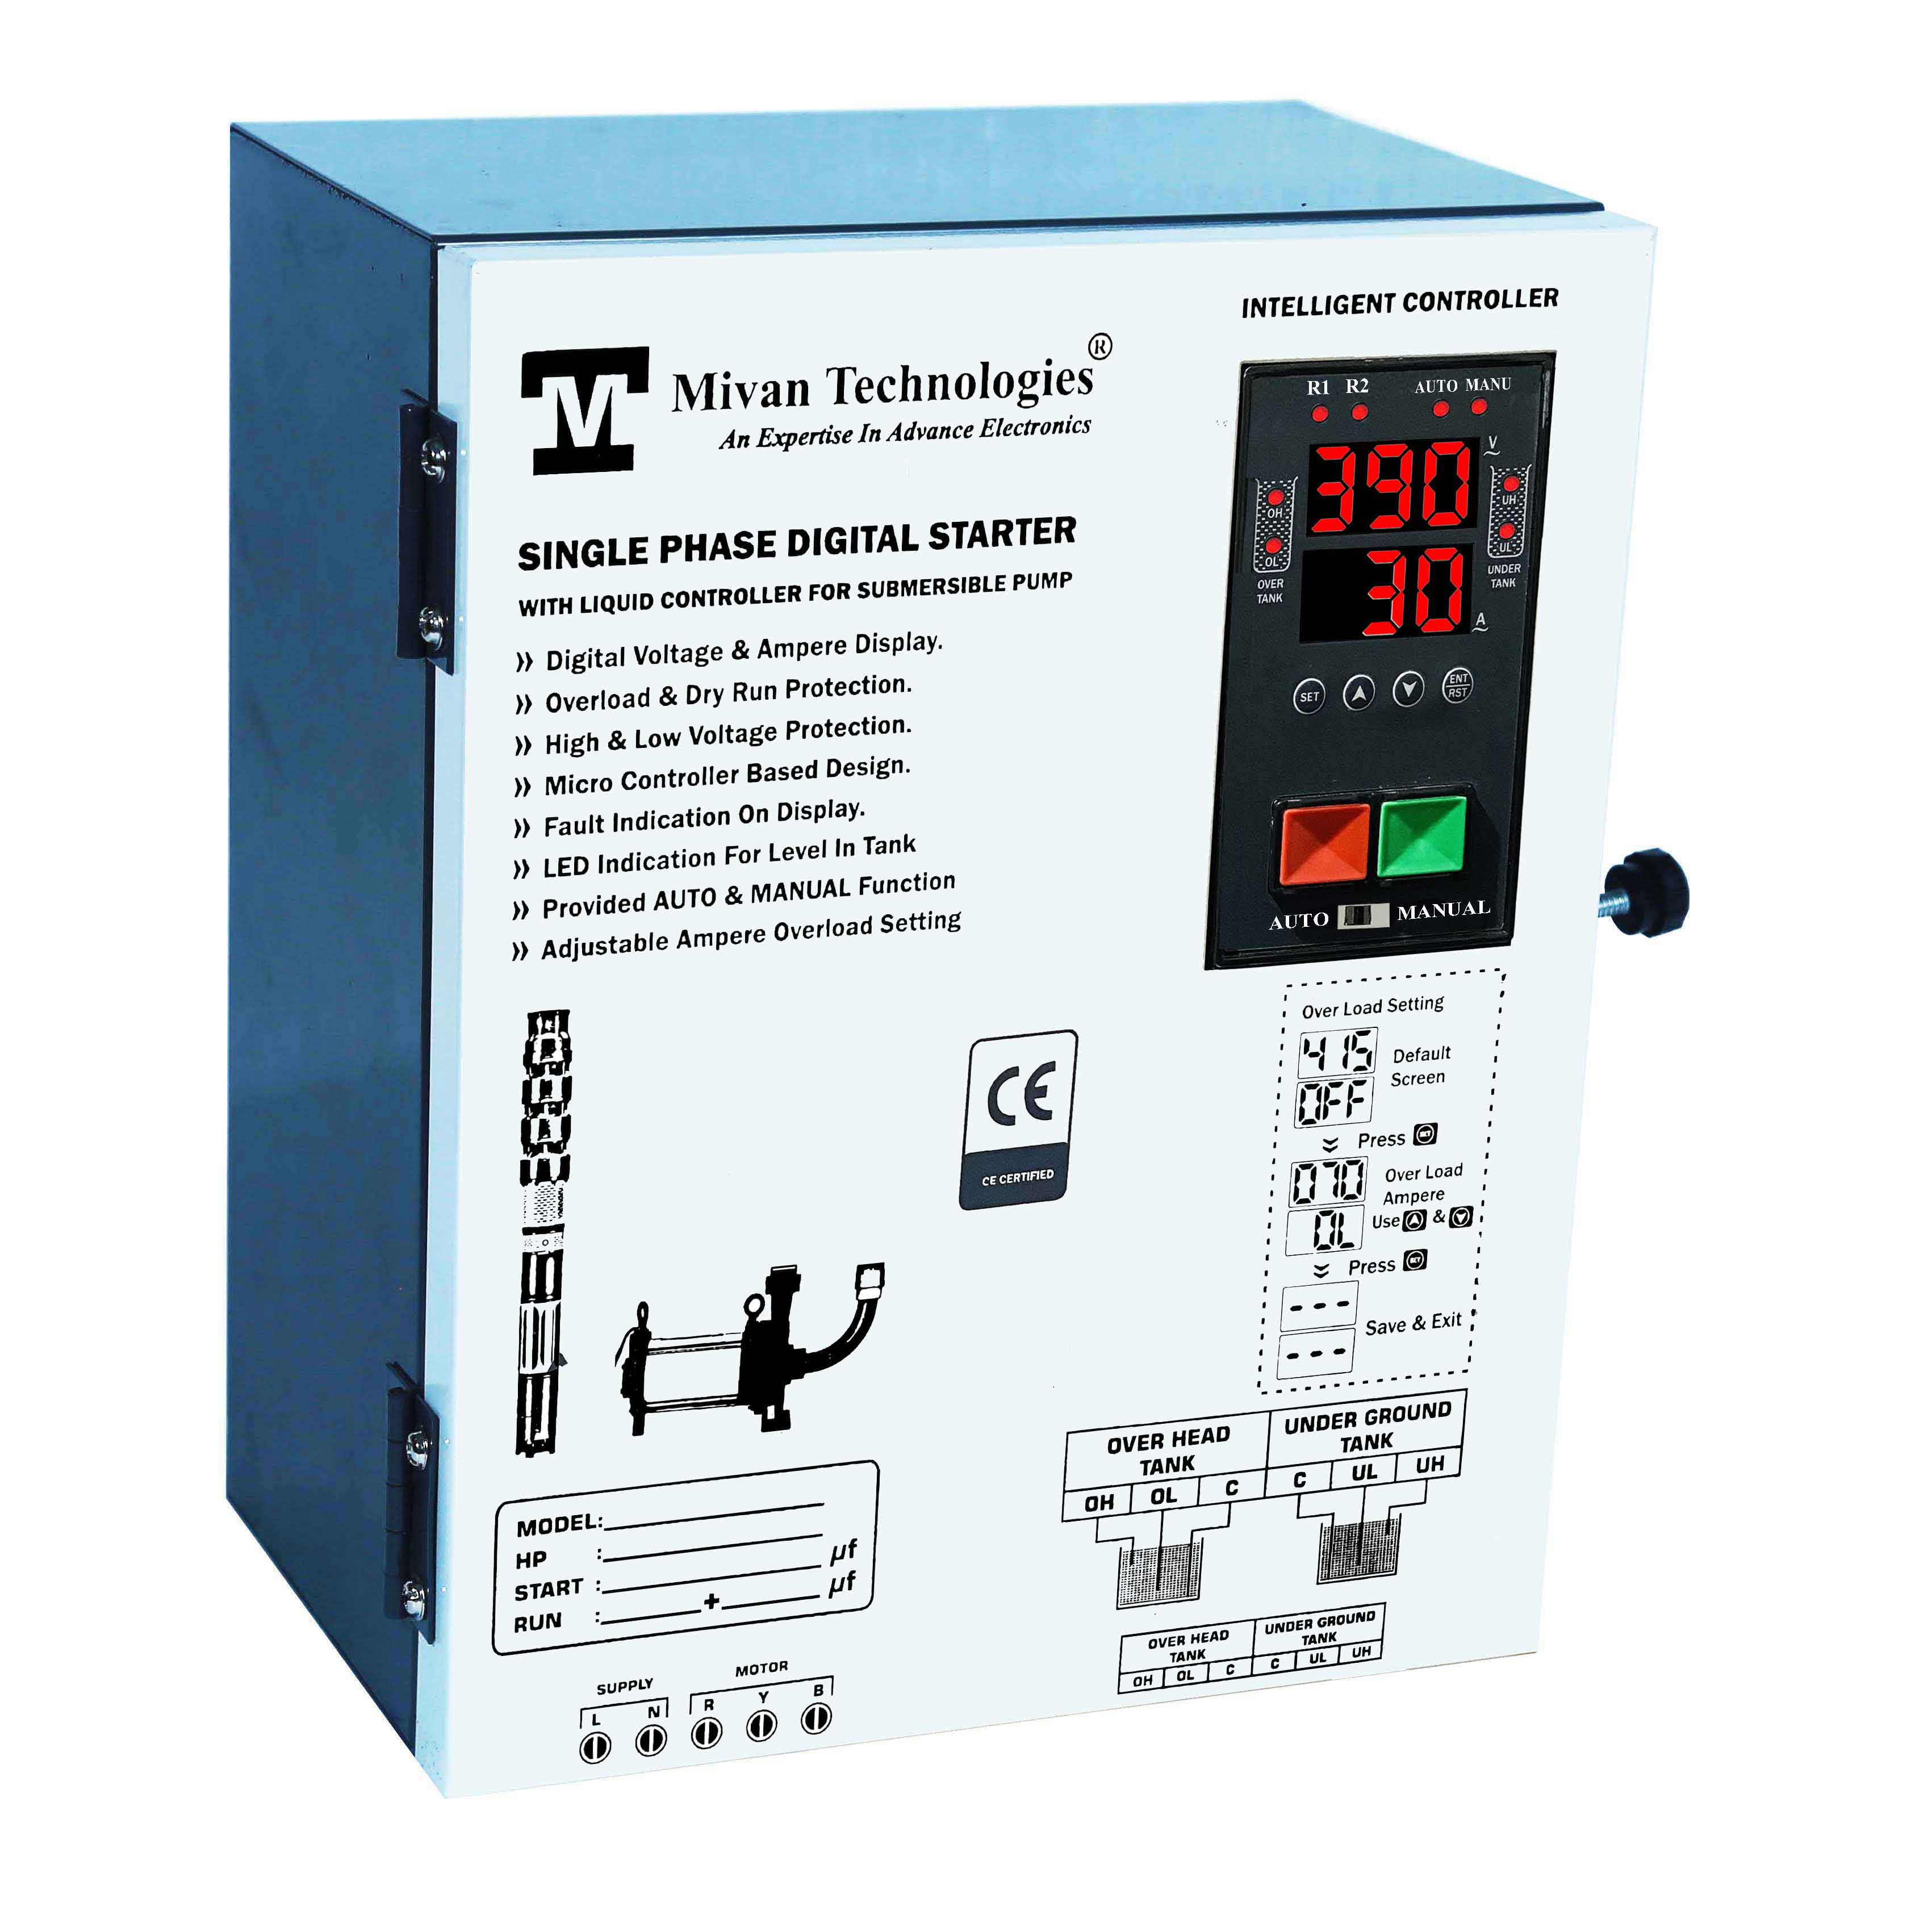 DSL SR Digital water controller and starter panel with volt and amp meter with HV LV OL DRY protection cyclic timer